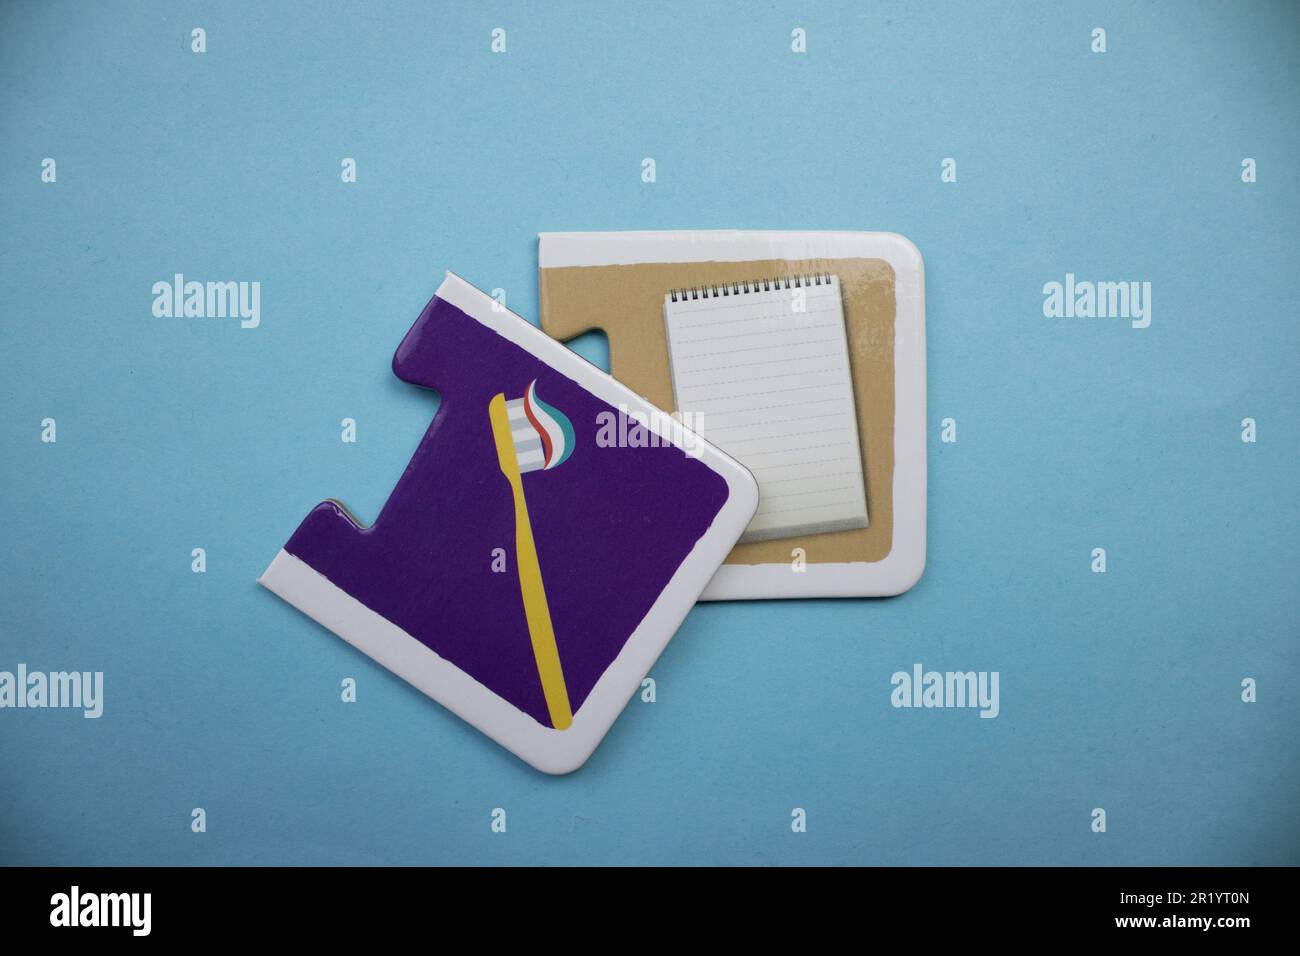 Information puzzle placed on a blue background. Toothbrush, notebook Stock Photo